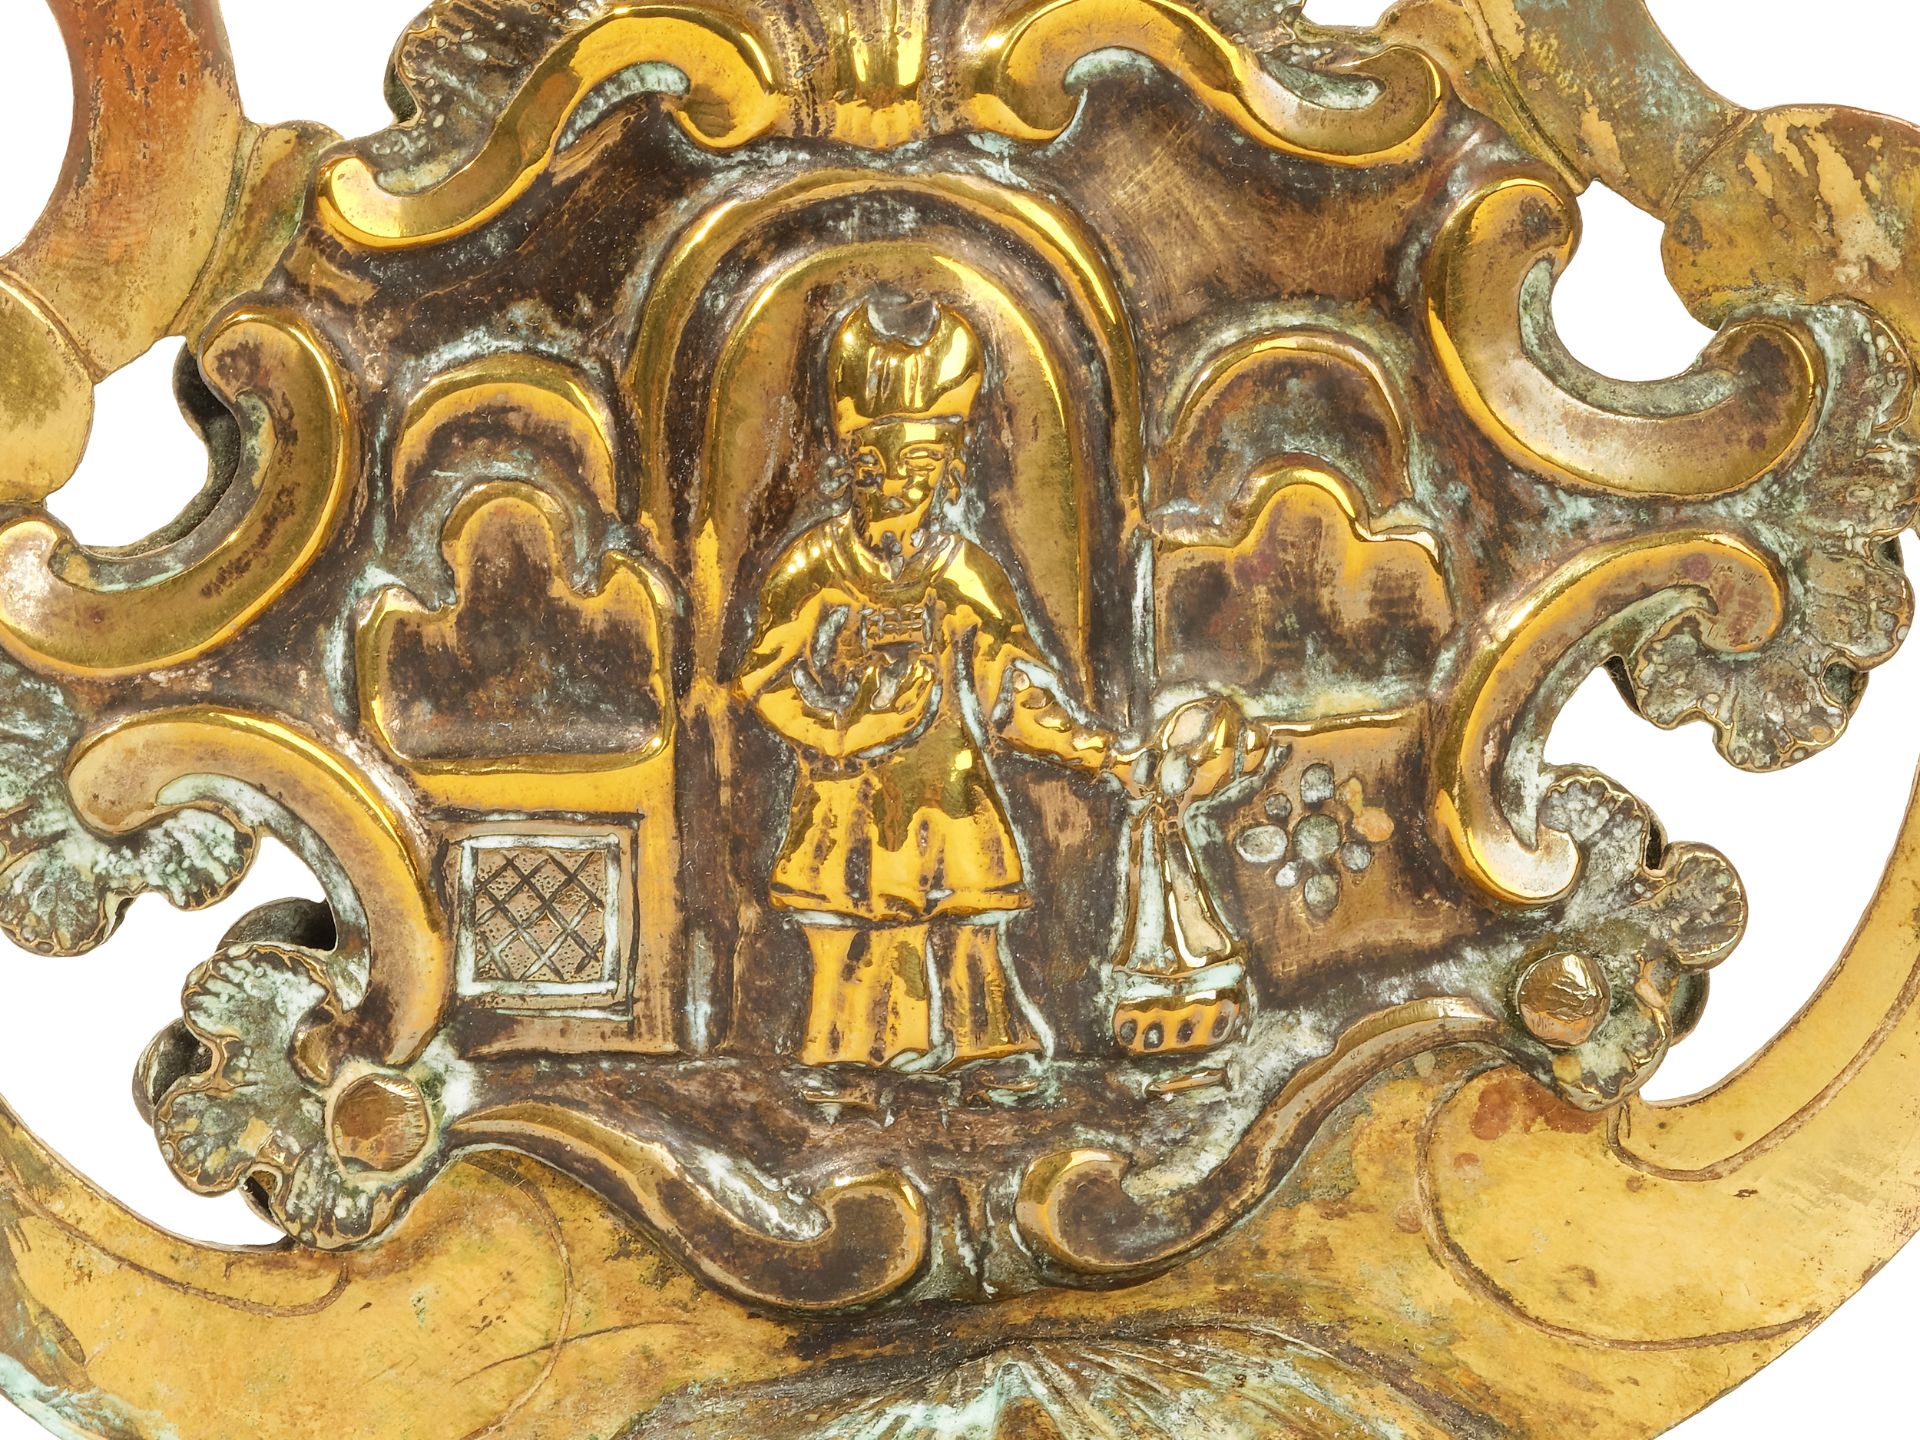 Top of a processional pole, 
South German, 
18th century - Image 4 of 6